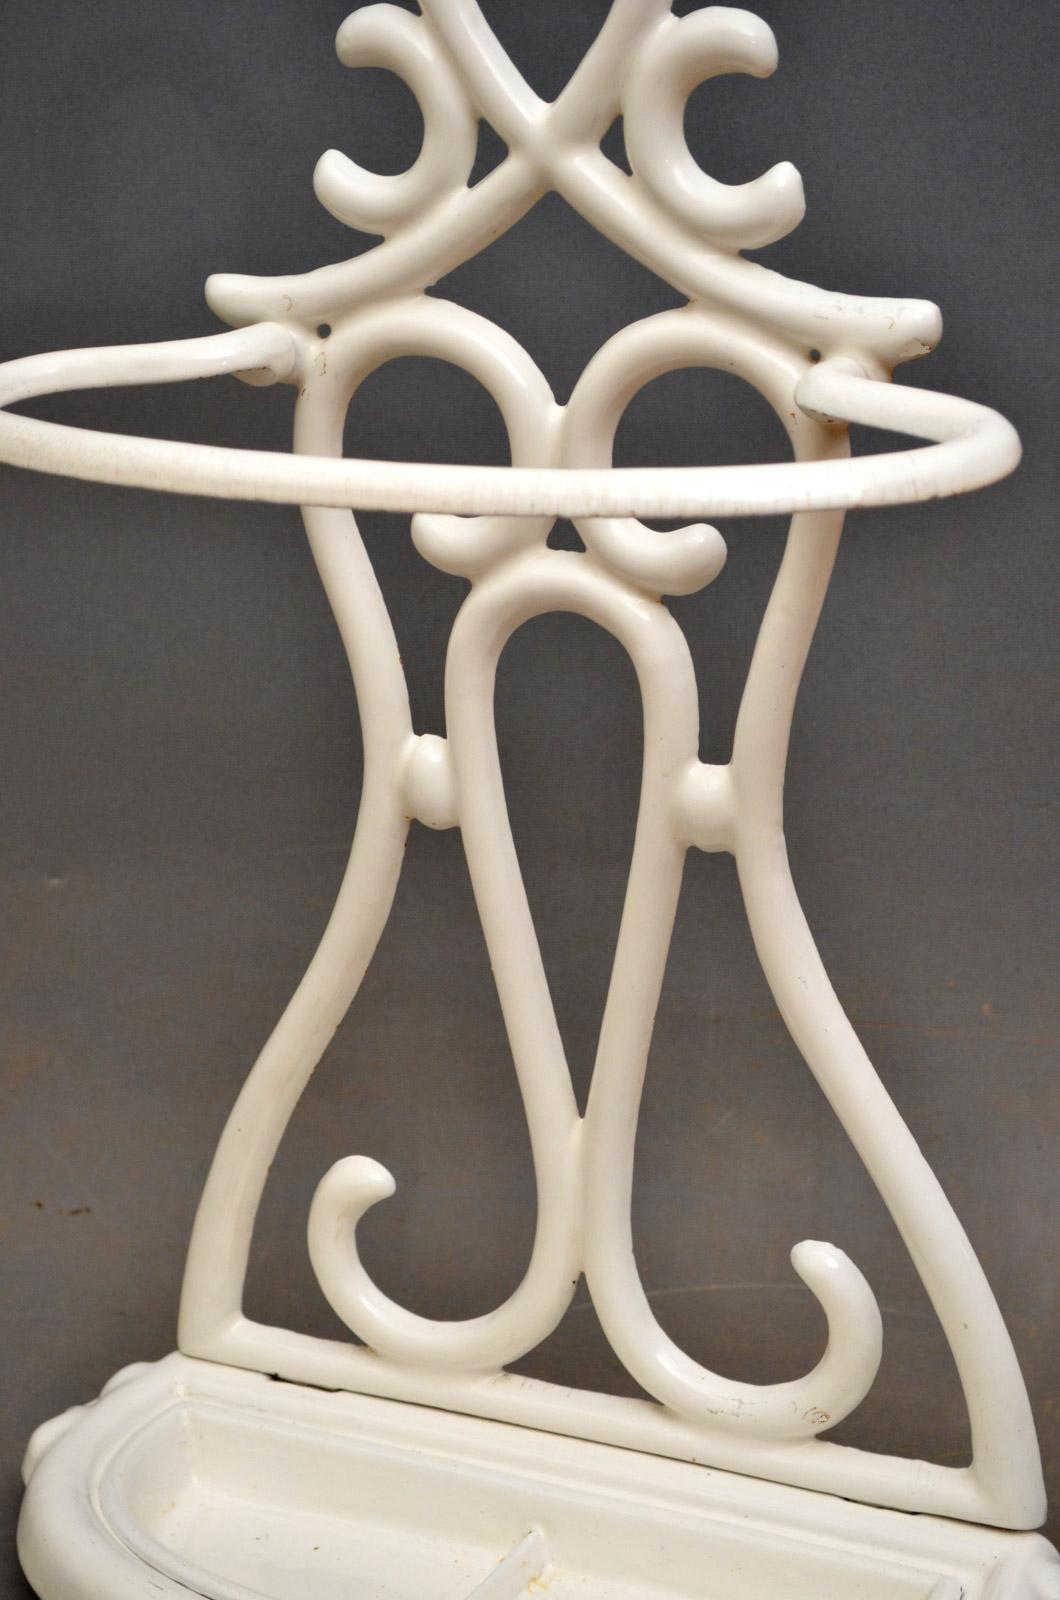 K088 stylish French, Art Nouveau cast iron umbrella stand of organic design, having original drip tray and retaining white enamel throughout, all in wonderful condition throughout - ready to place at home, circa 1910
Measures: H 29